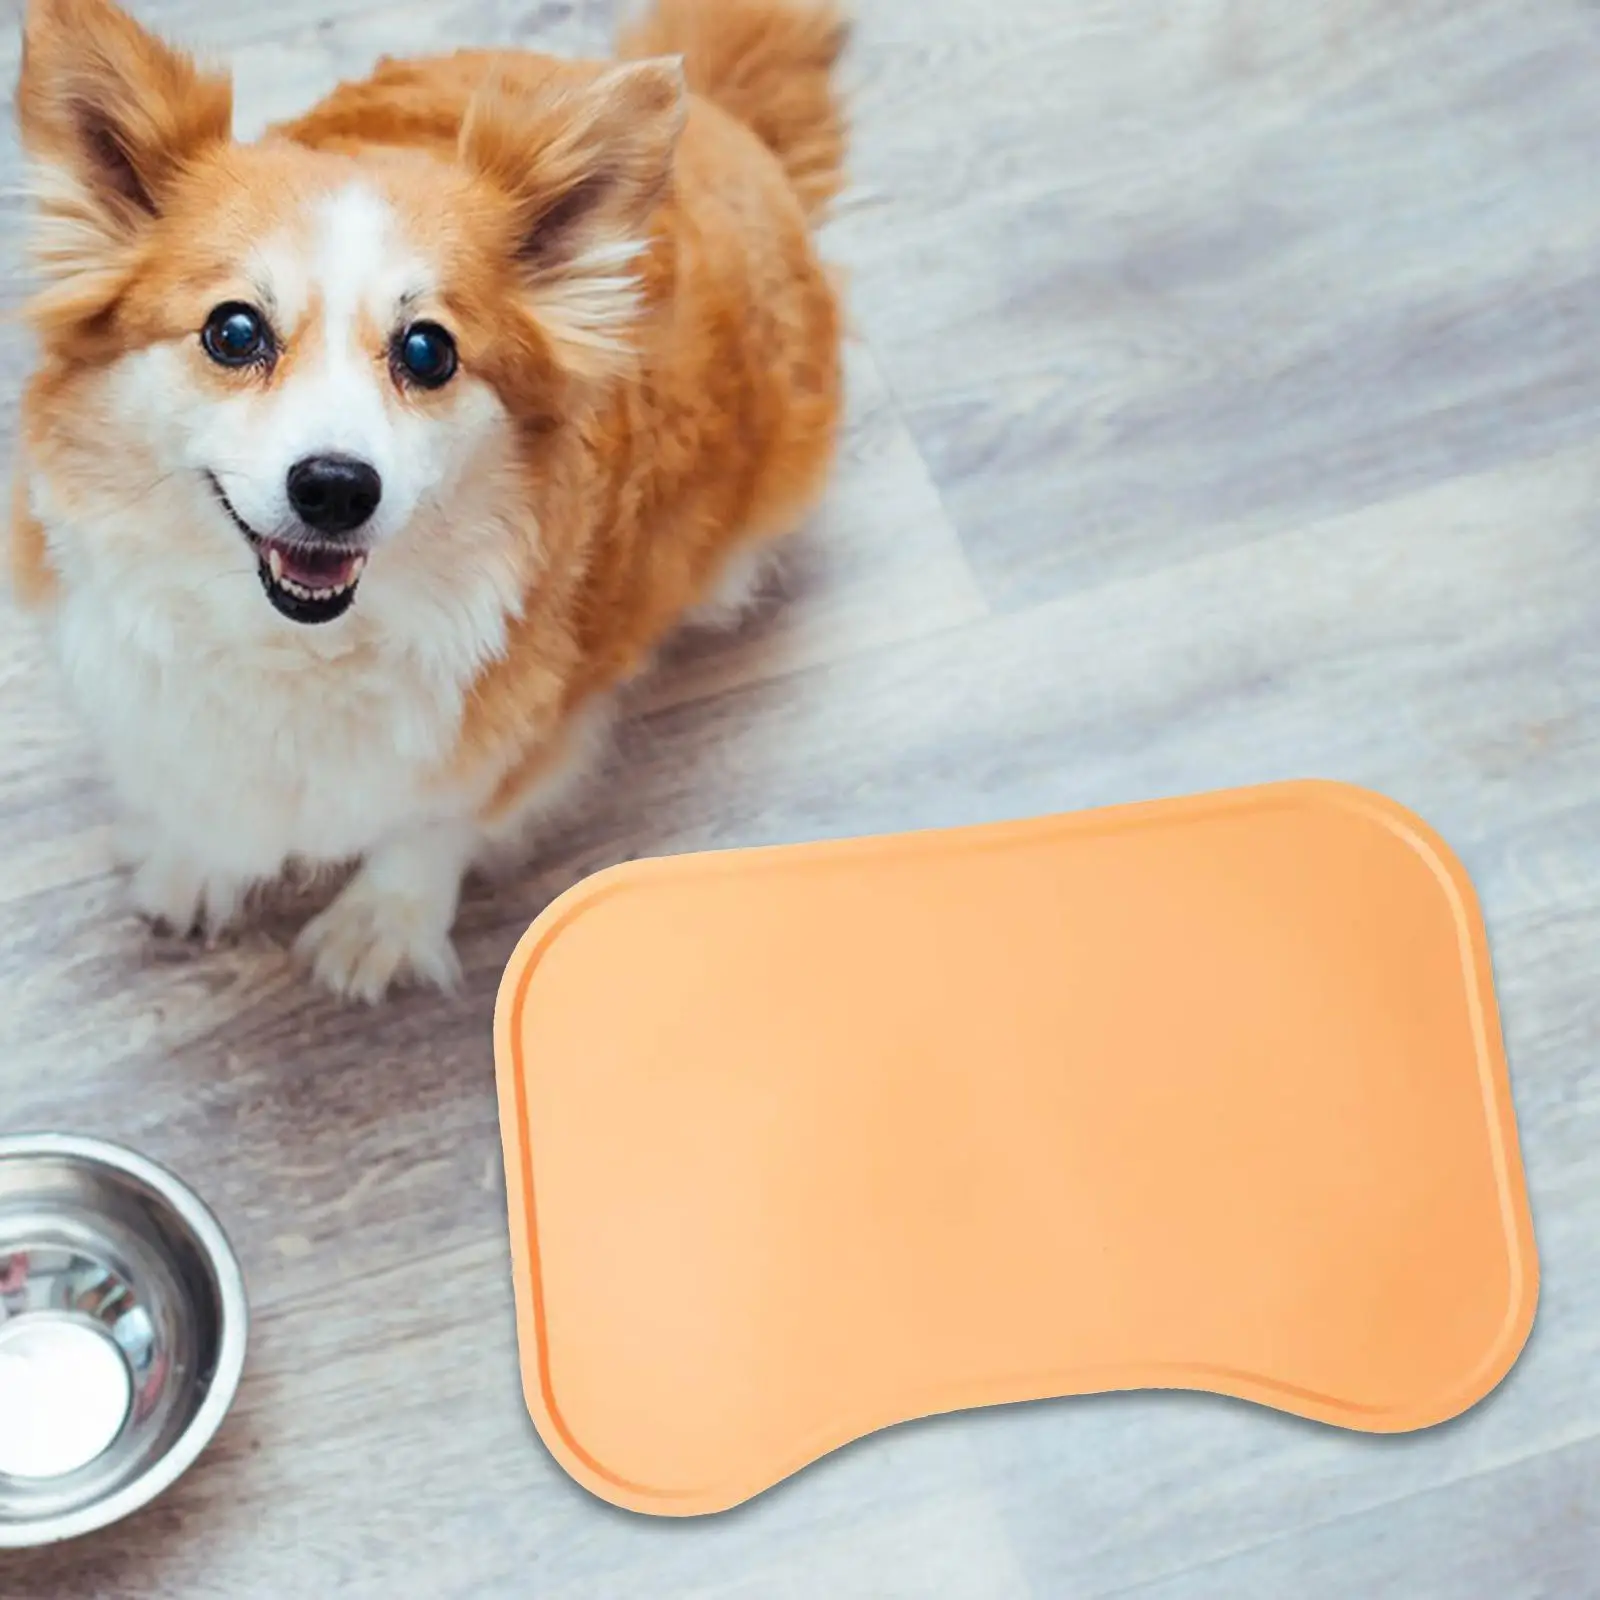 Pet Dog Food Mat Placemat Feeding Mat Bowl Mat Waterproof with Raised Edges Dish Tray Easy to Clean Puppy Supplies